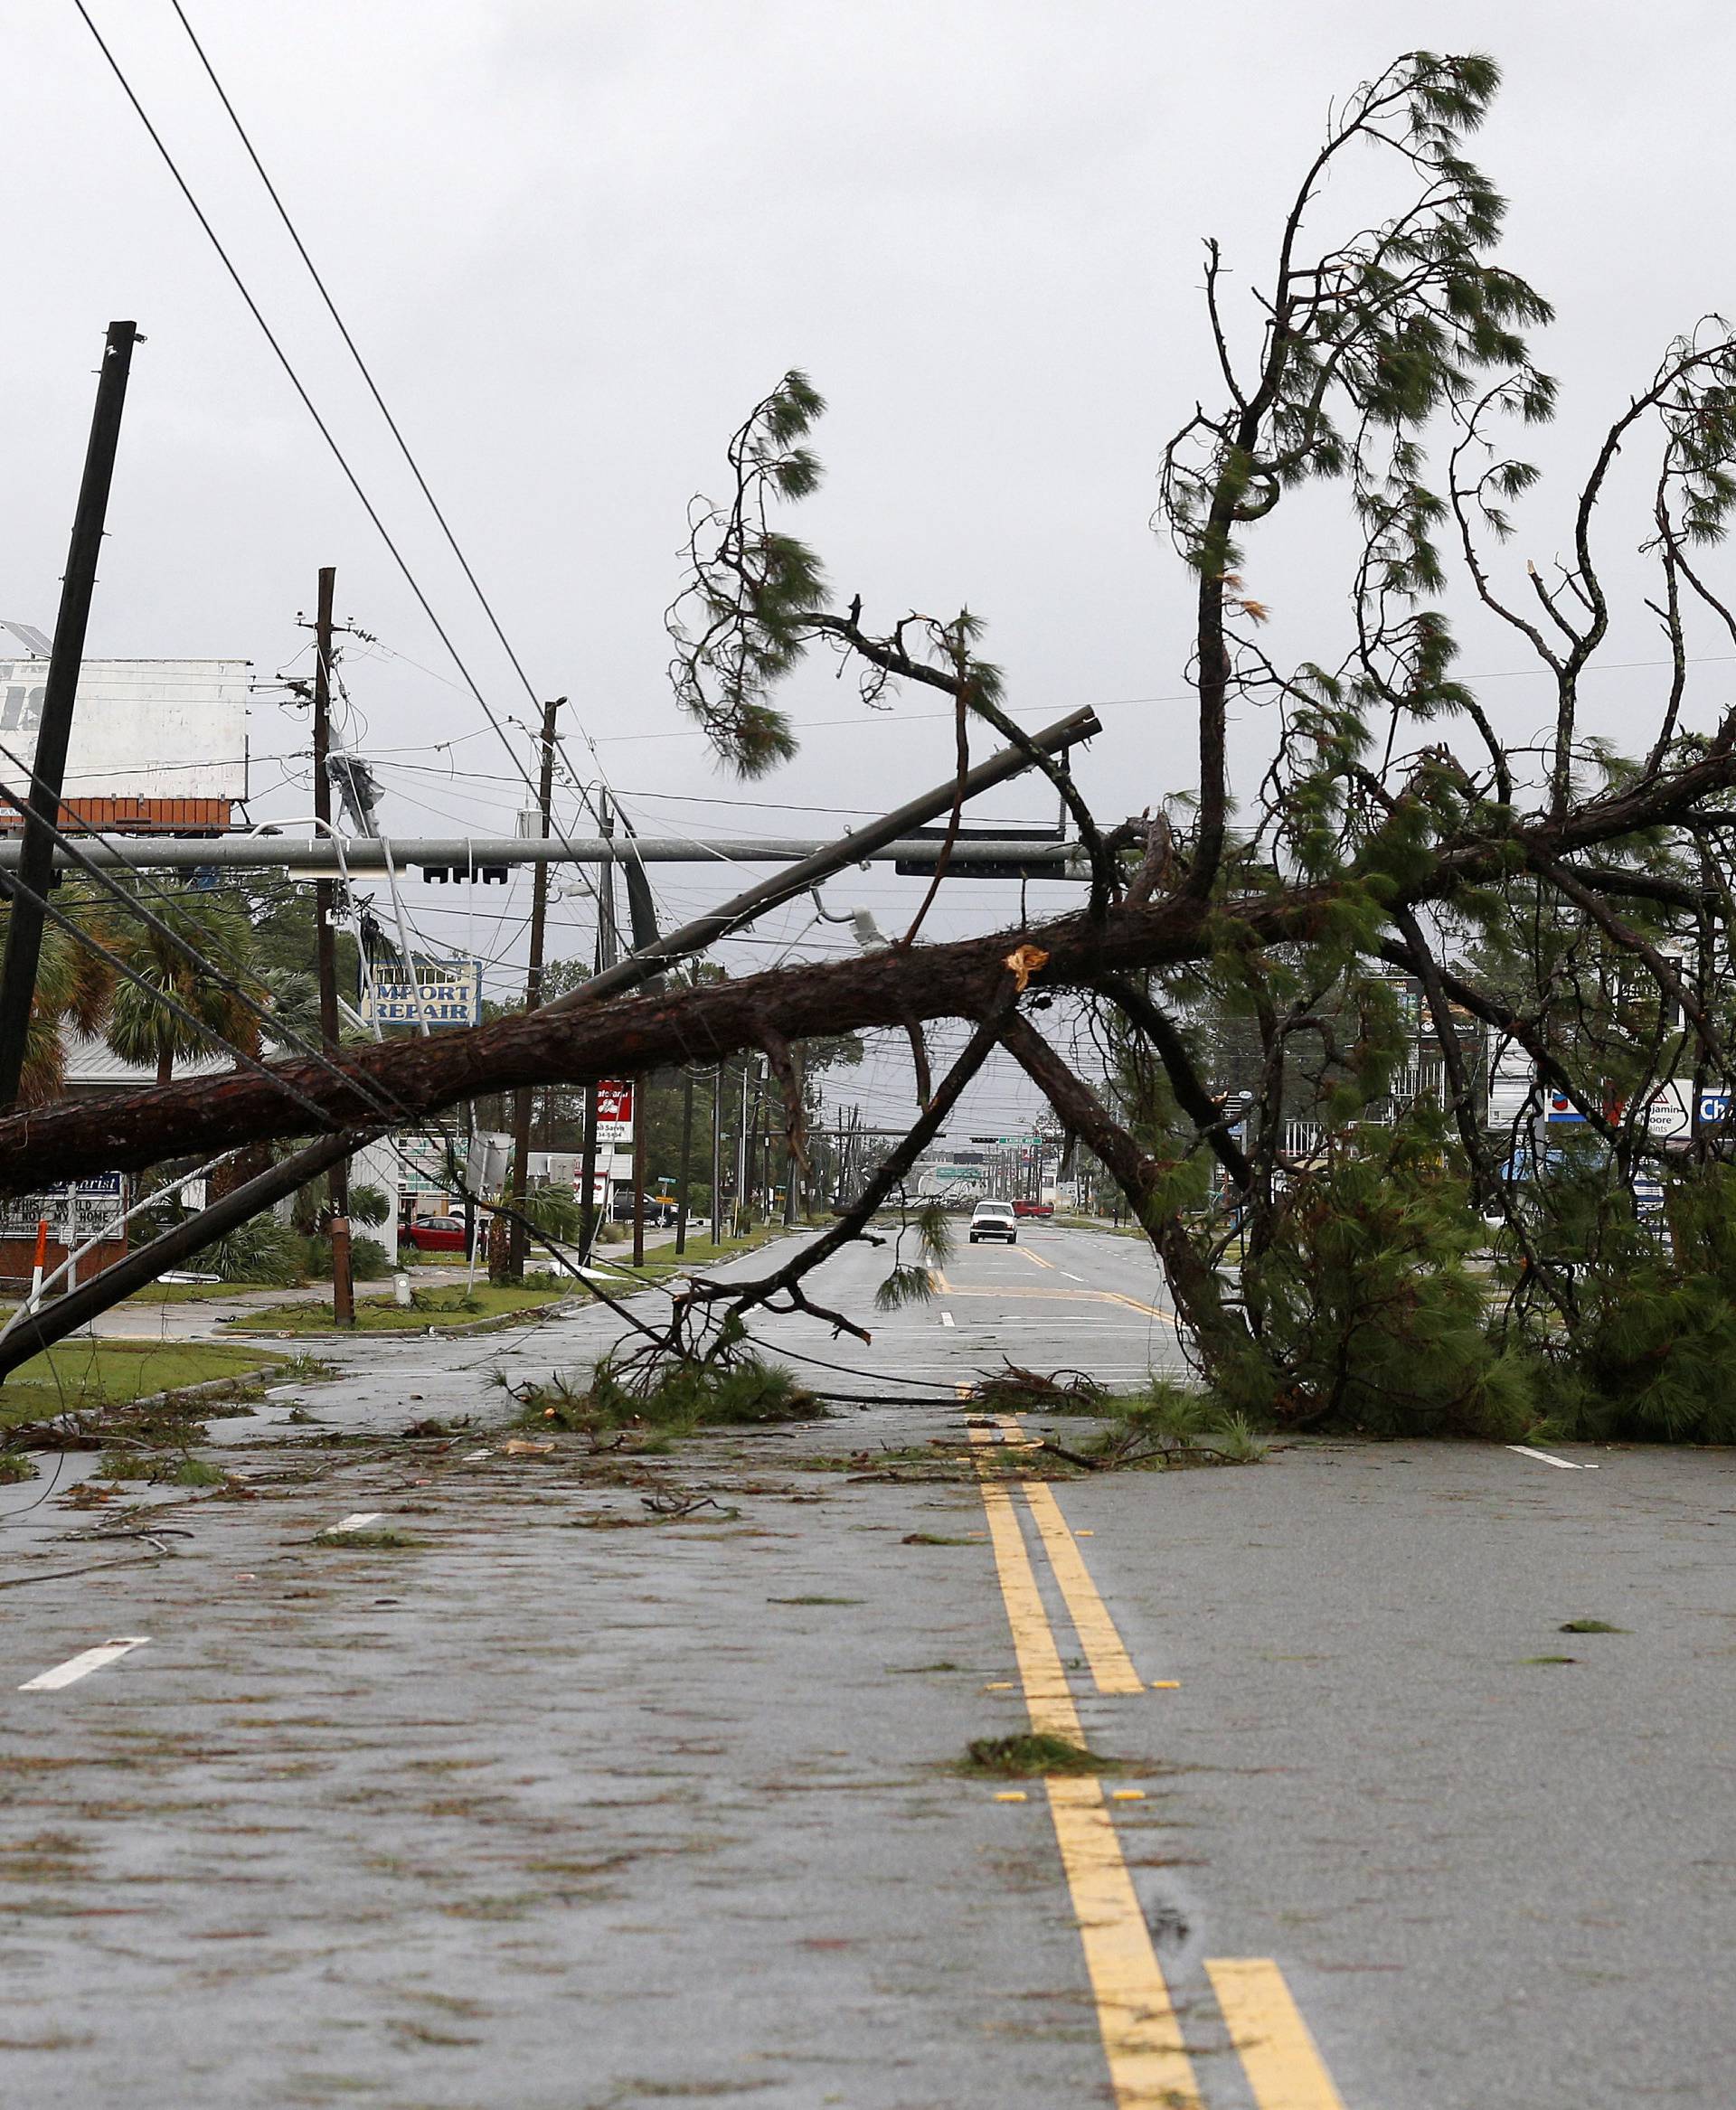 A downed tree and power lines block a road during Hurricane Michael in Panama City Beach